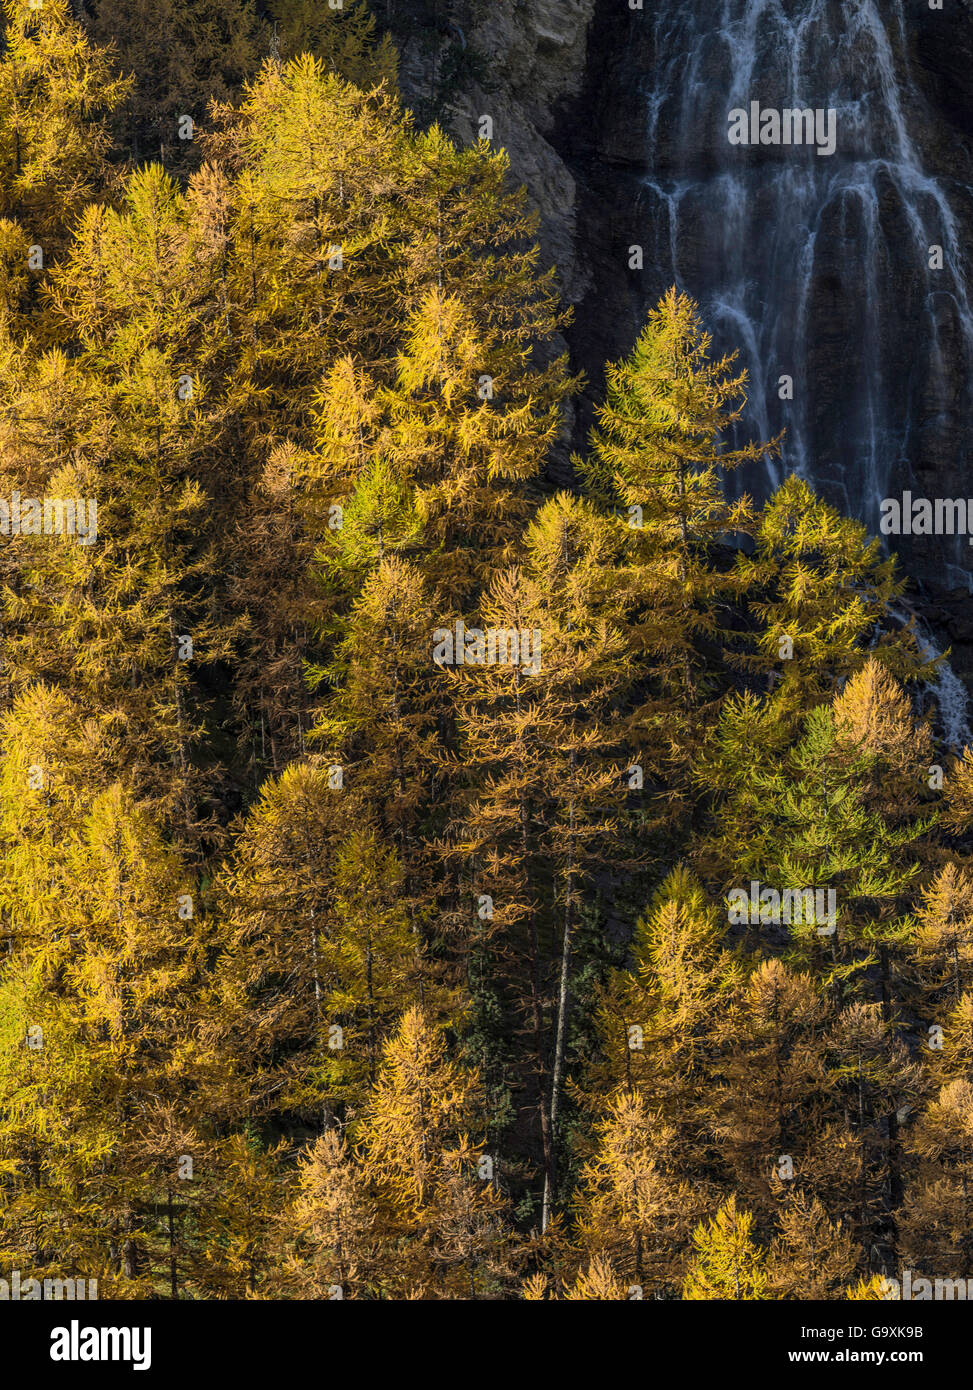 Larch (Larix sp) trees in autumn with waterfall behind, Queyras Regional Park, Hautes-Alpes, France, November 2014. Stock Photo